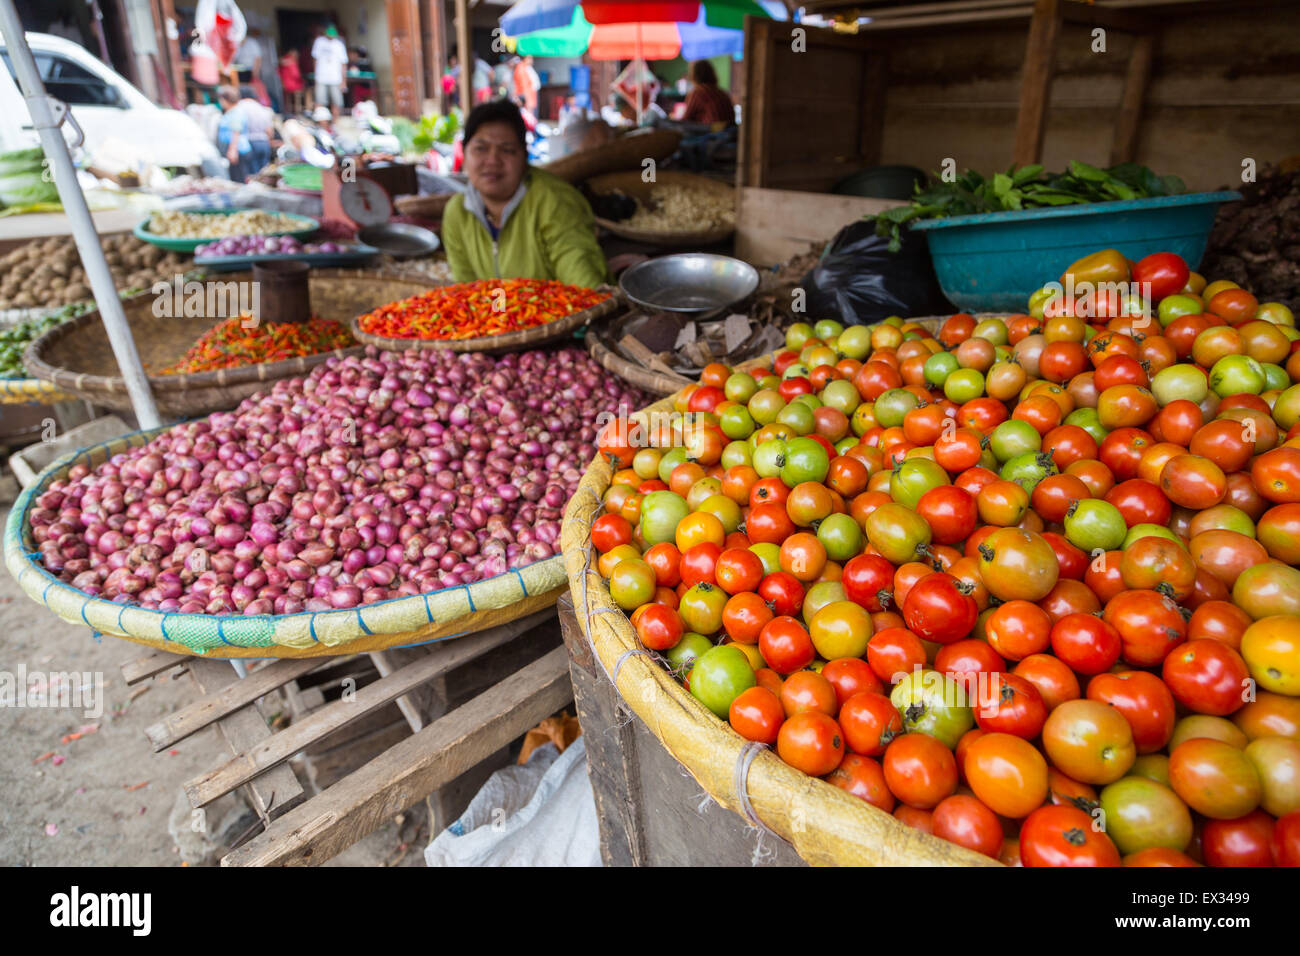 The Tomohon market attracts tourists visiting North Sulawesi, Indonesia with exotic meats, fruits, vegetables and accessories. Stock Photo